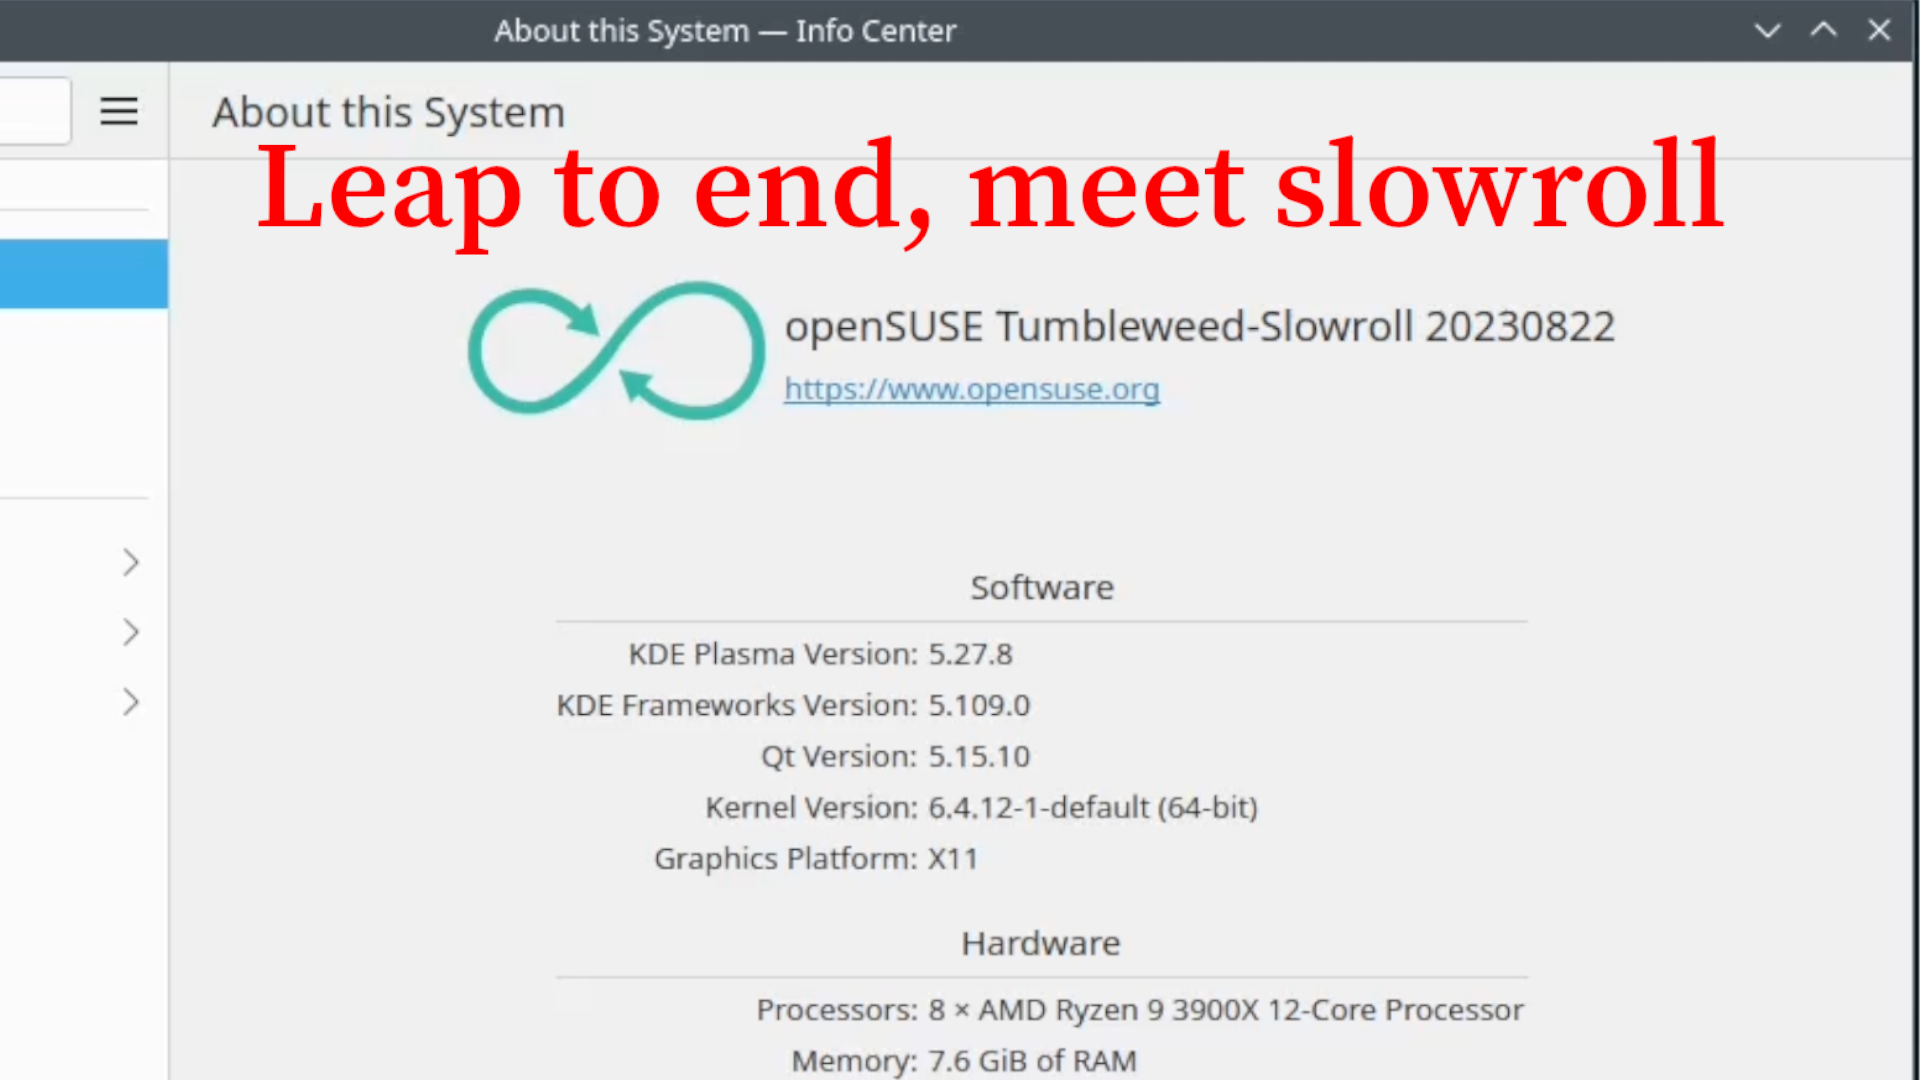 OpenSuse Leap to be discontinued, Introducing SlowRoll